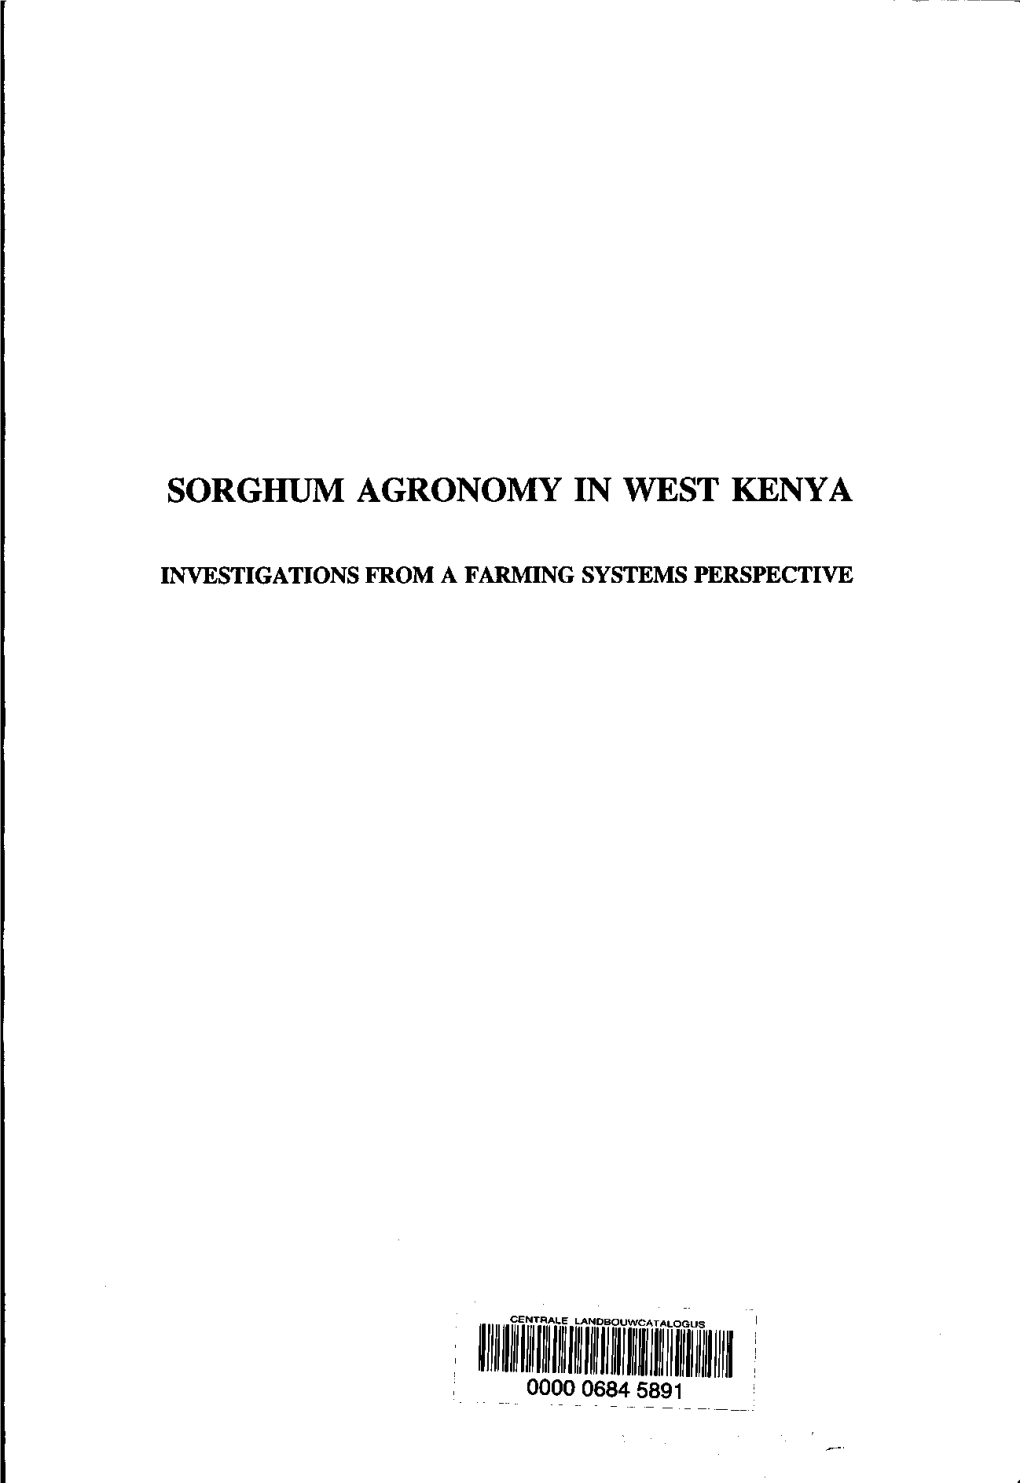 Sorghum Agronomy in West Kenya : Investigations from a Farming Systems Perspective / H.J